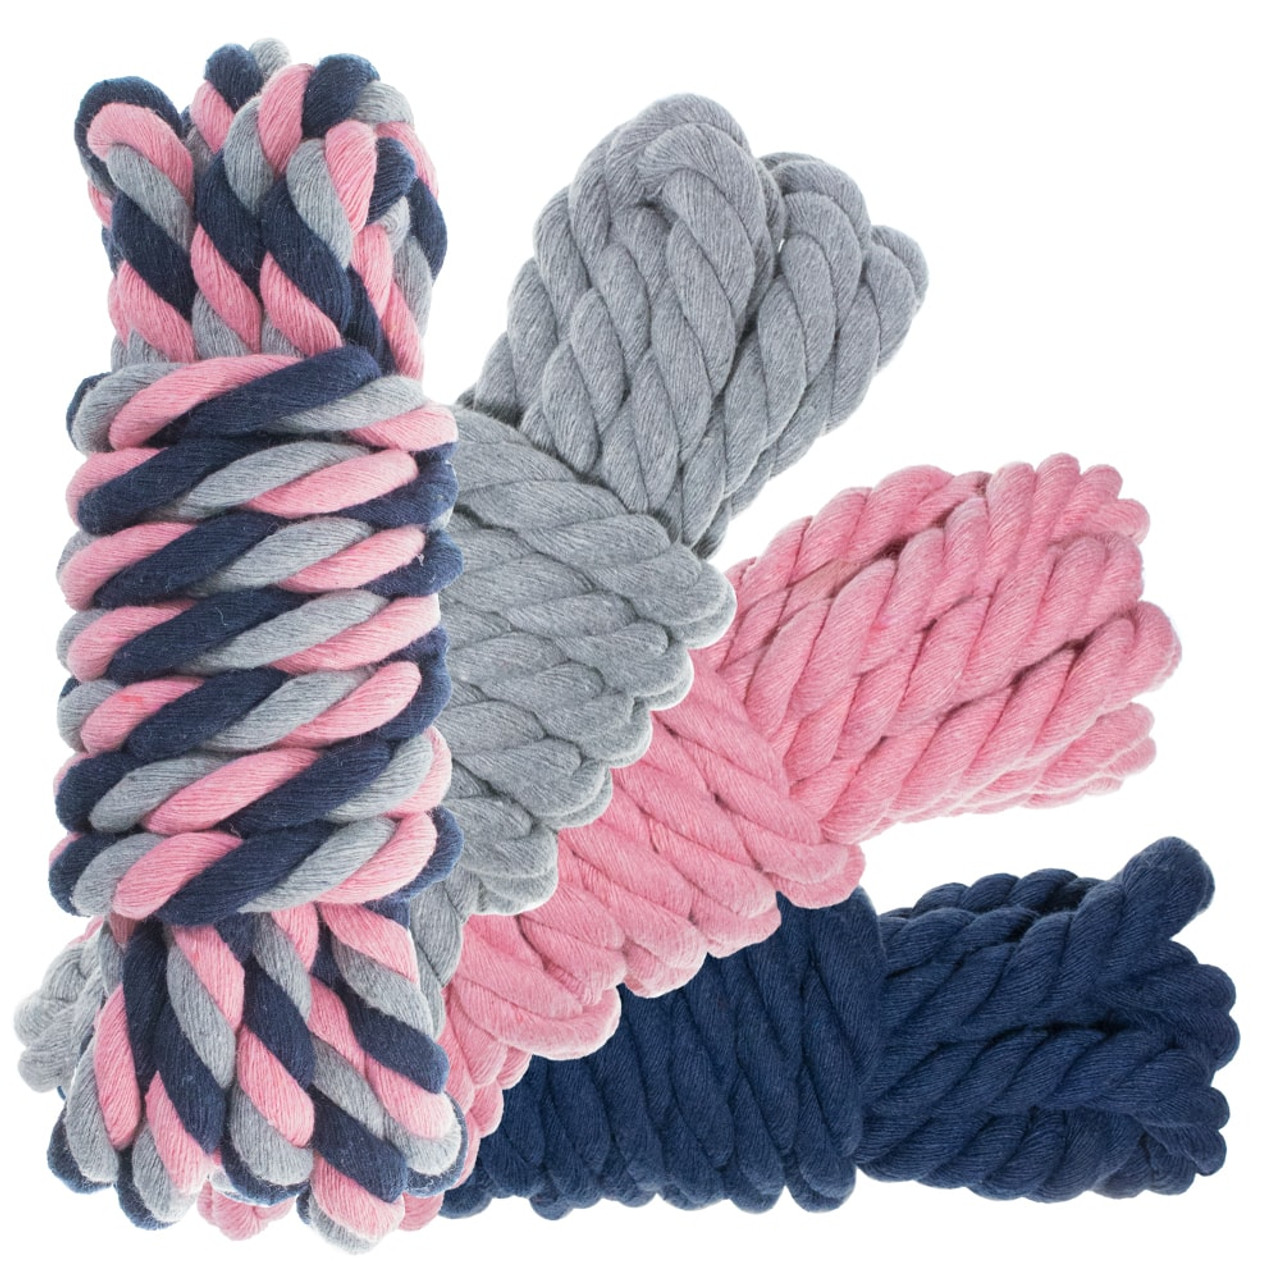 1/2 Twisted Cotton Rope 100' Kit - Dusty